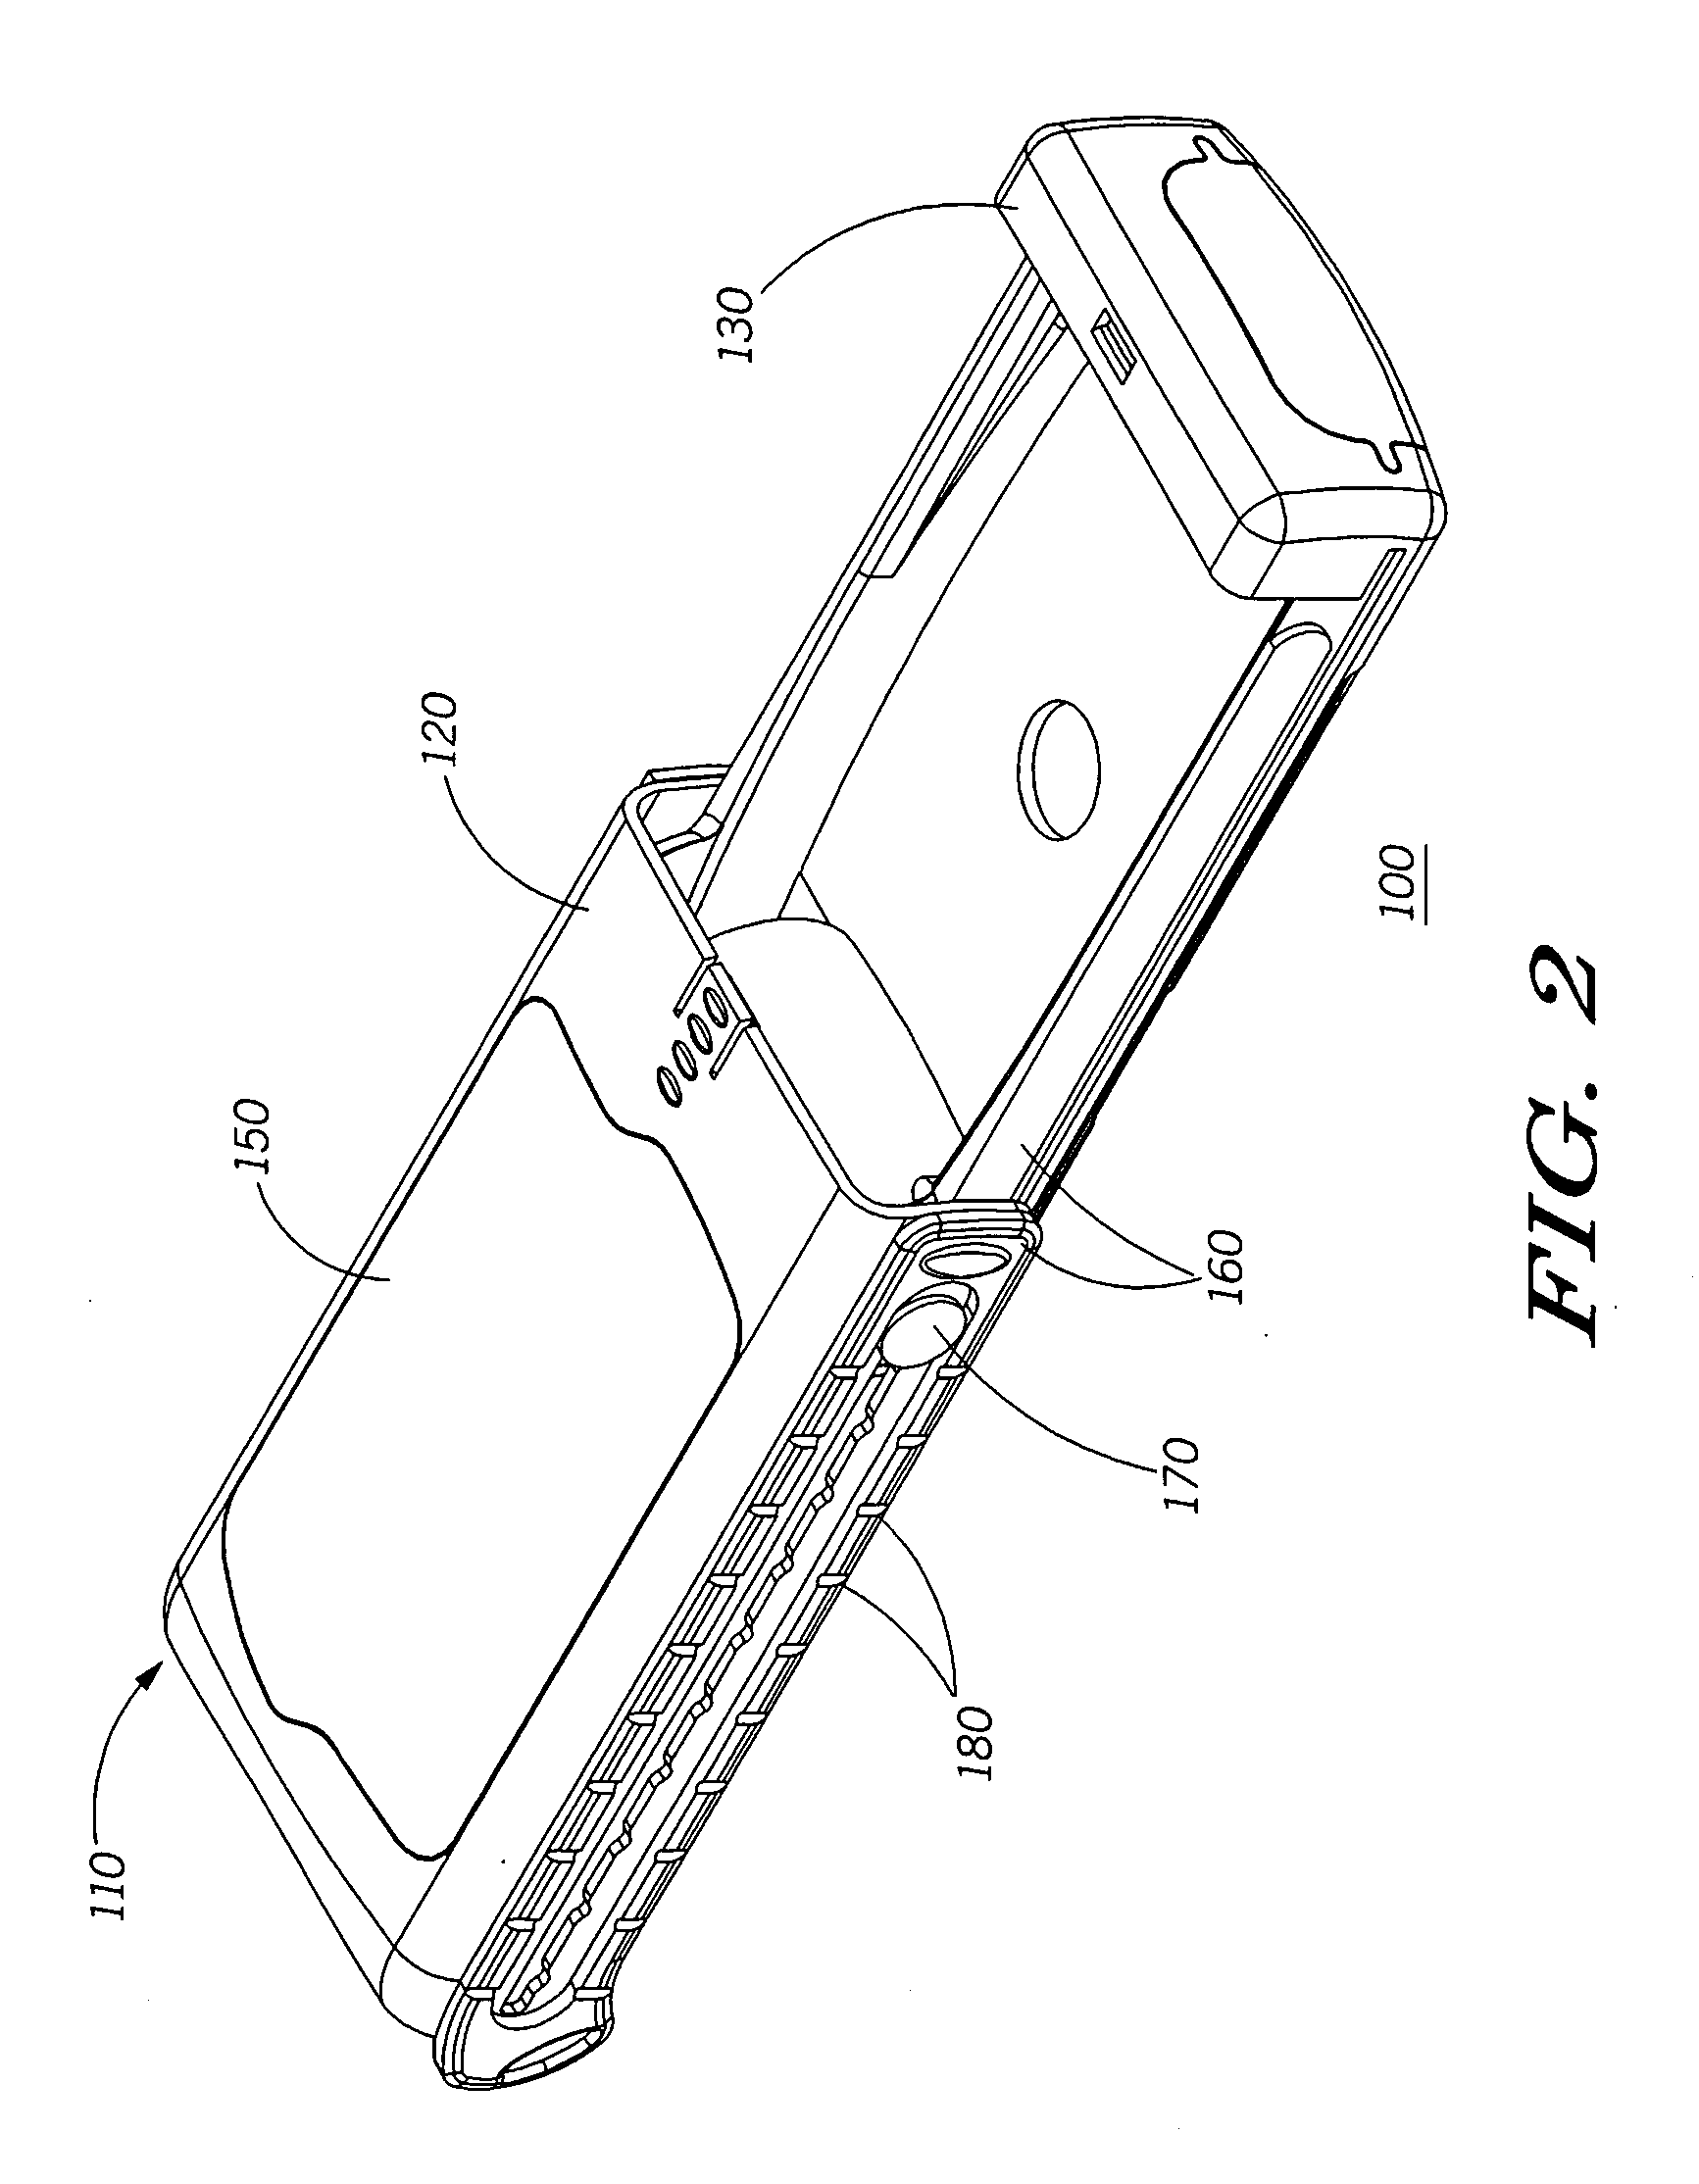 Combined packaging and storage apparatus having added functionality